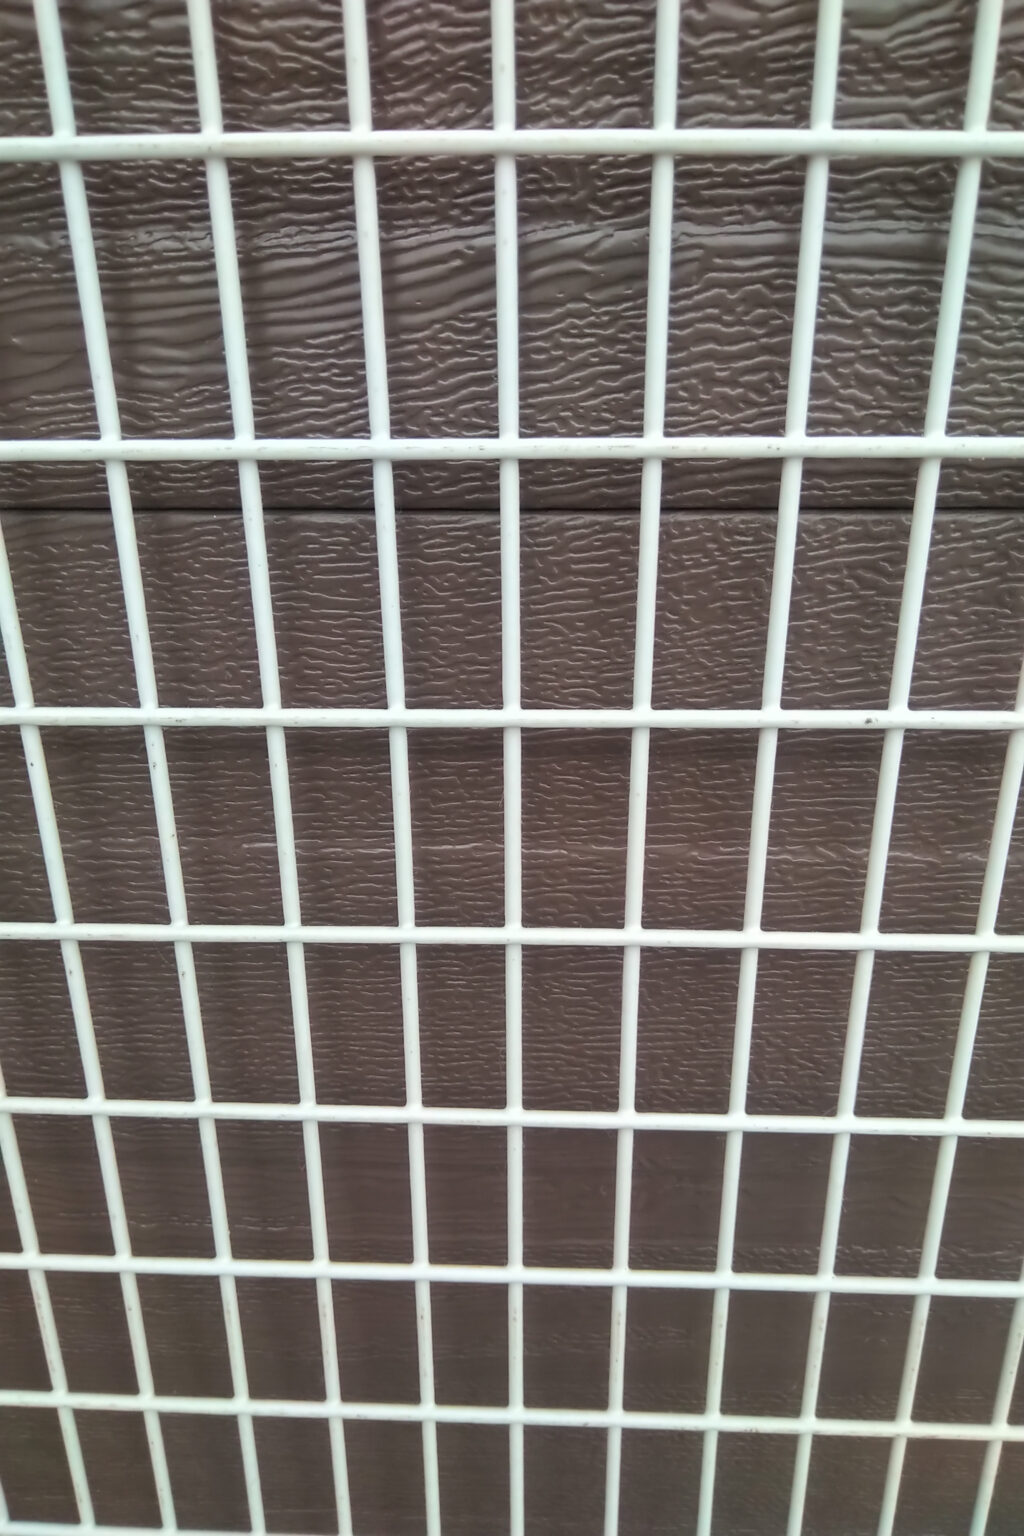 SPECIAL!!! 1" x 2" WHITE PVC Coated Wire Mesh .210" thick 72" x 96" FazStore